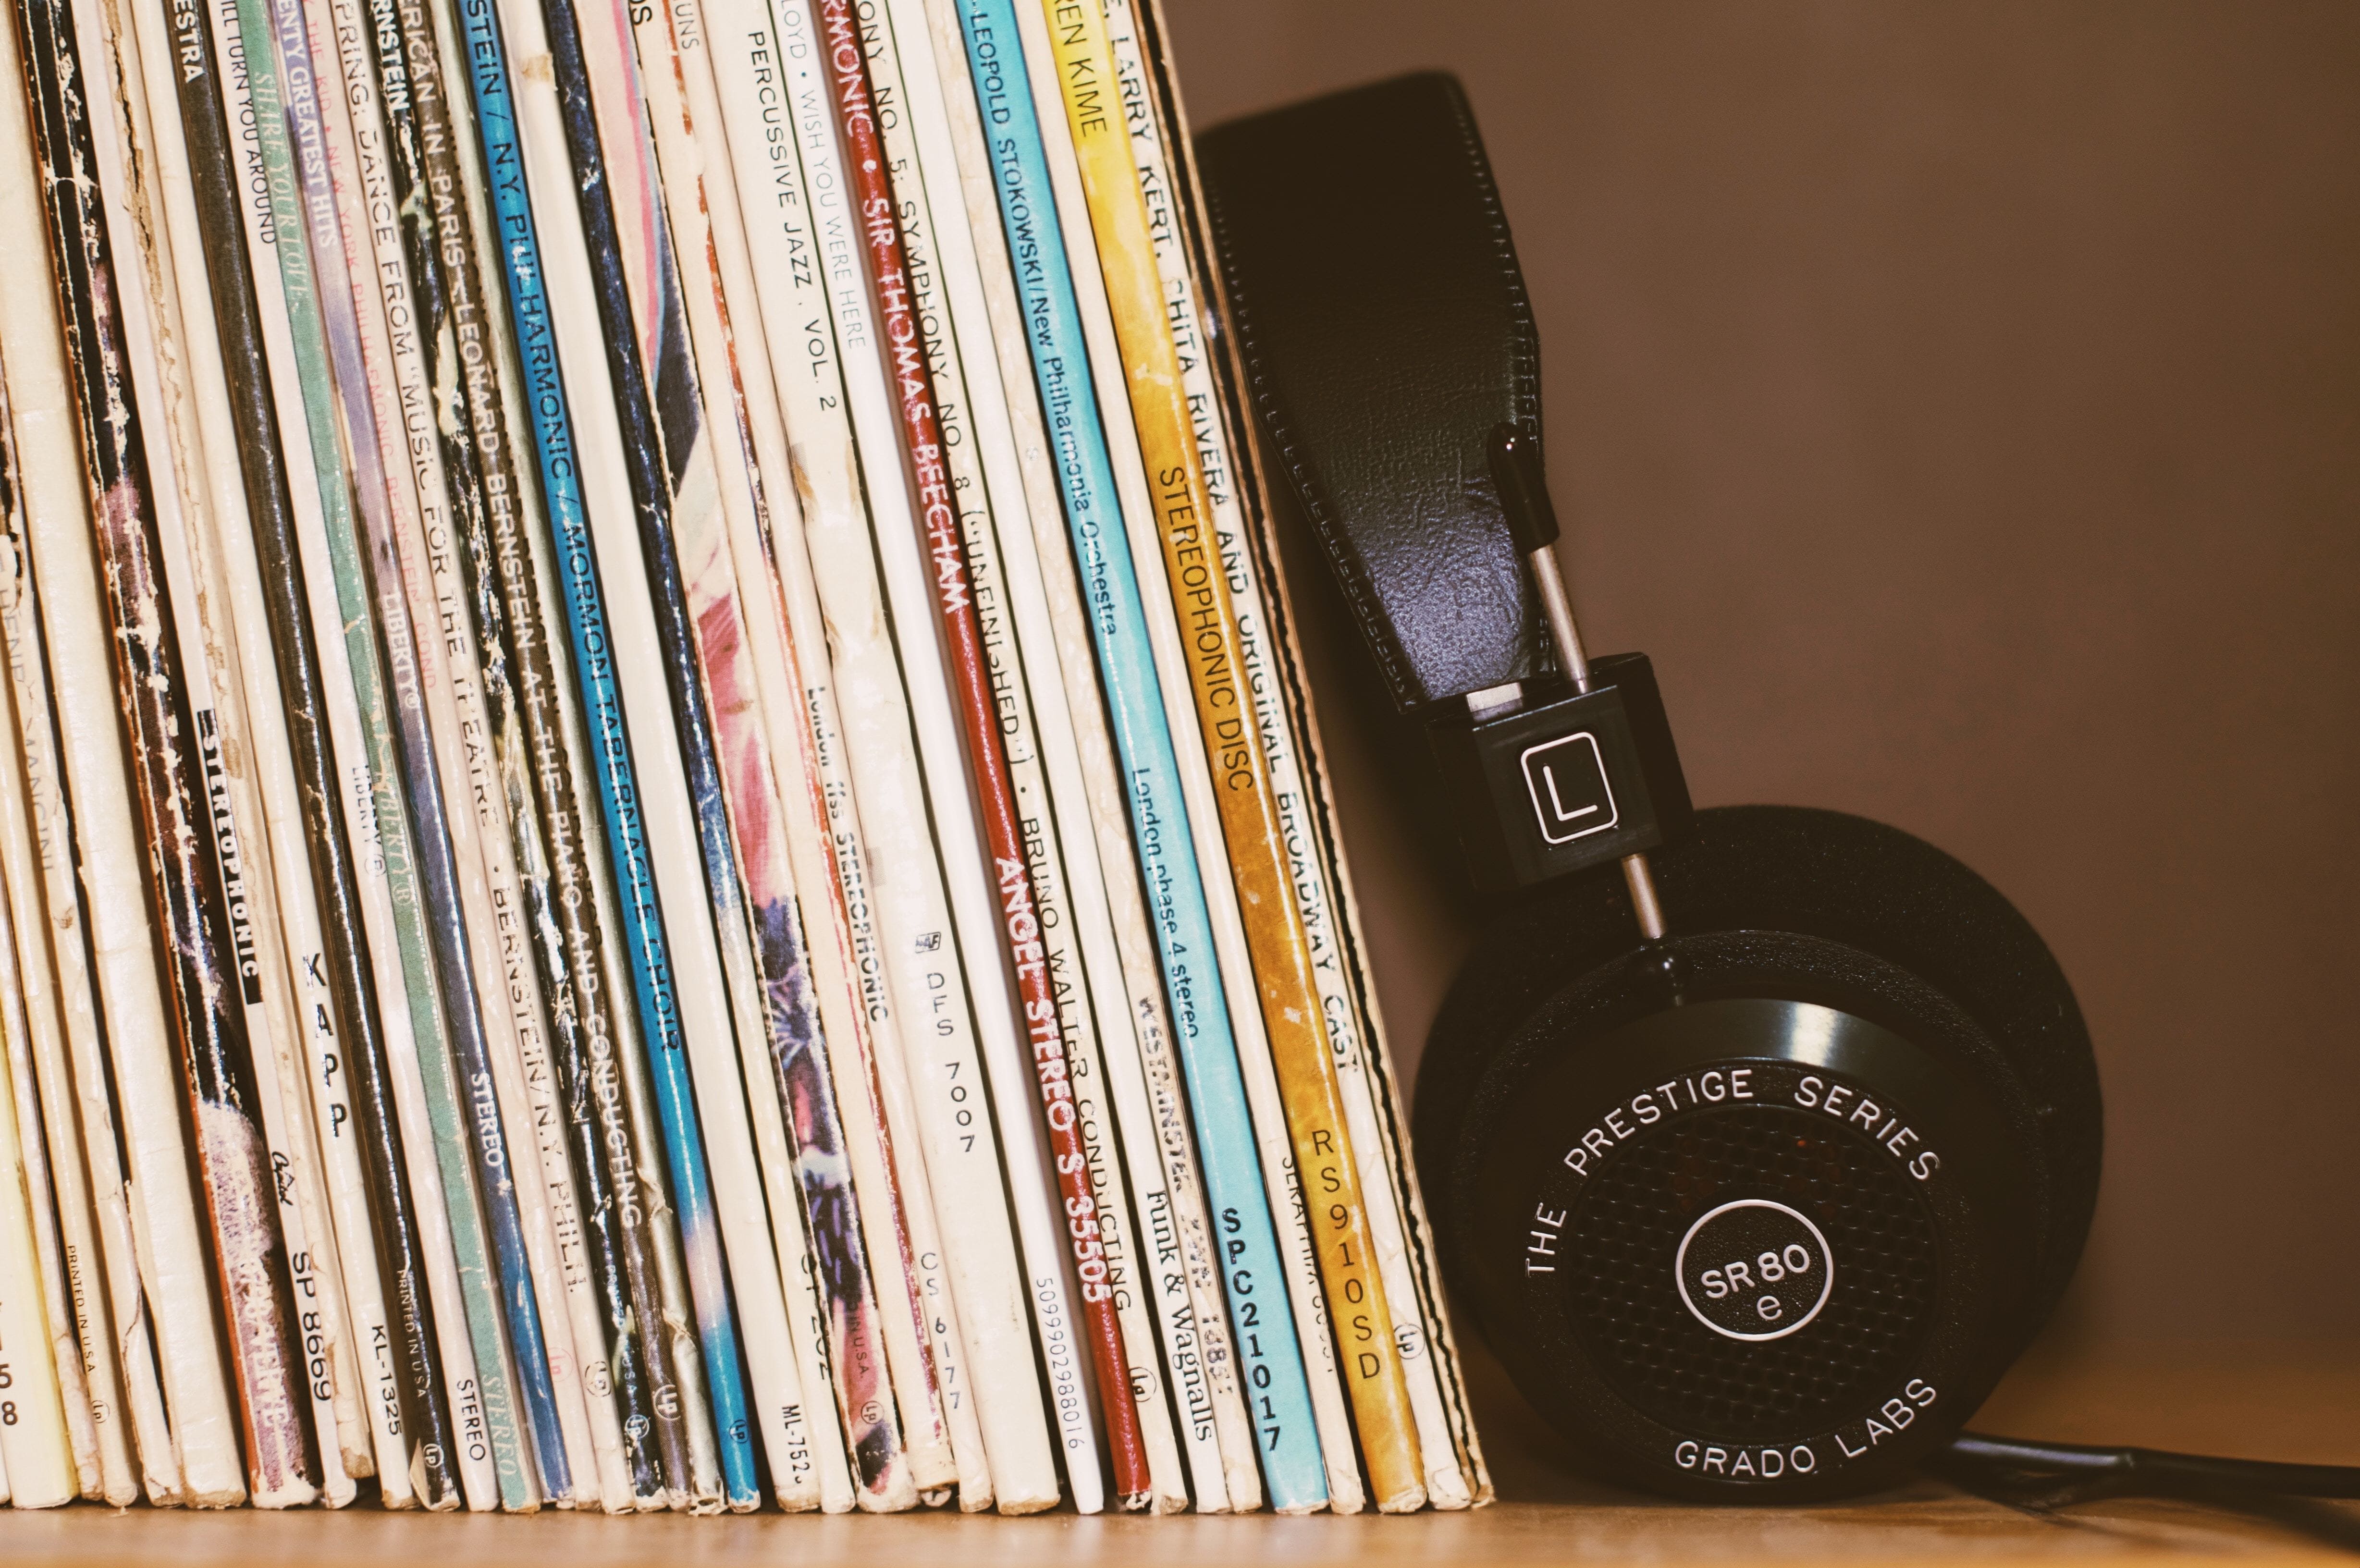 Vinyl Record Storage: 5 Things You Need to Know